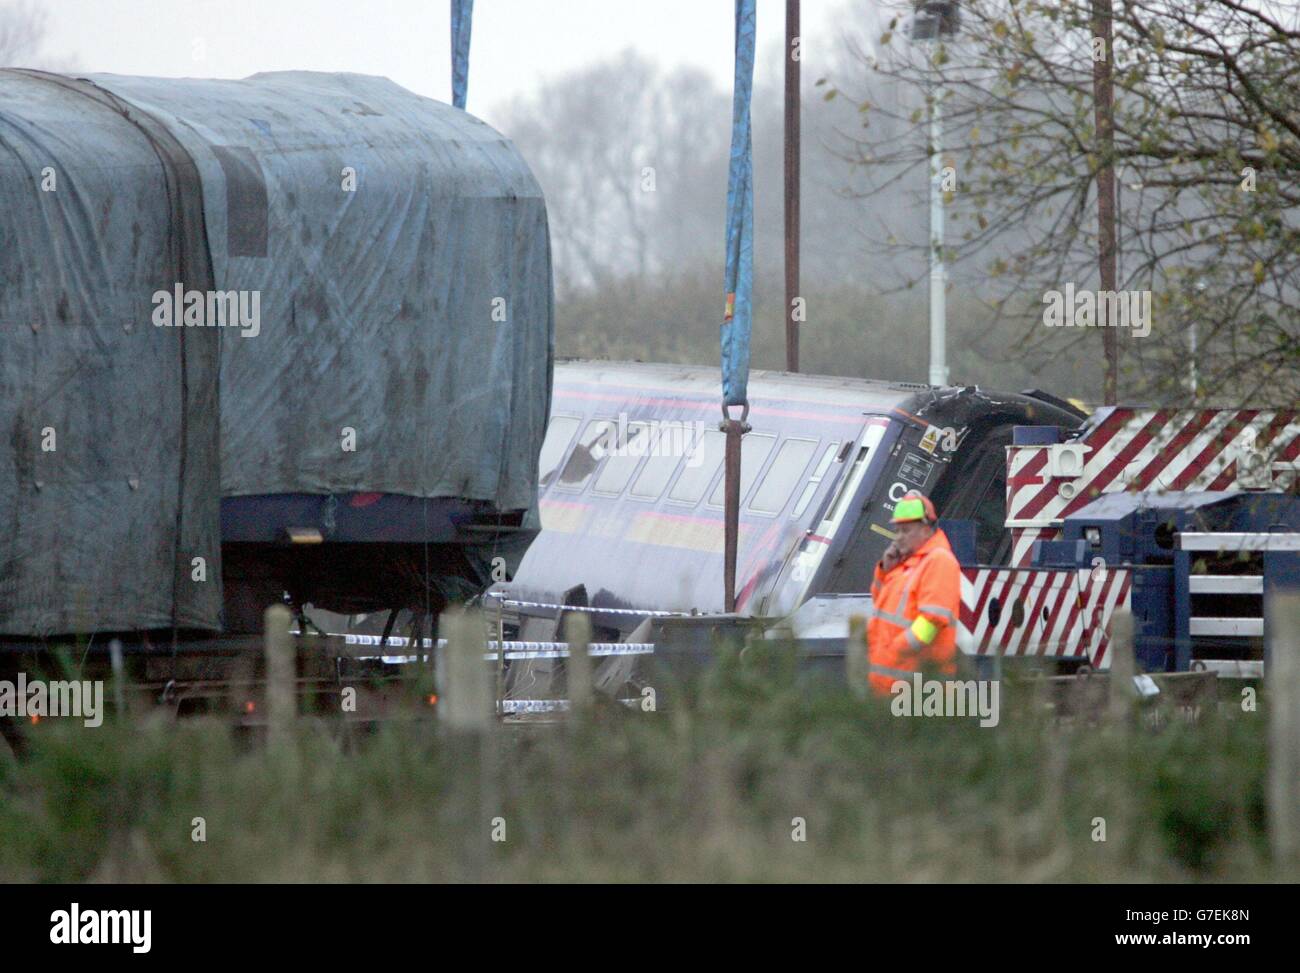 The scene at the train crash site at Ufton Nervet in Berkshire. A section of the train is being placed on to a low loader lorry to be taken away for examination. Stock Photo